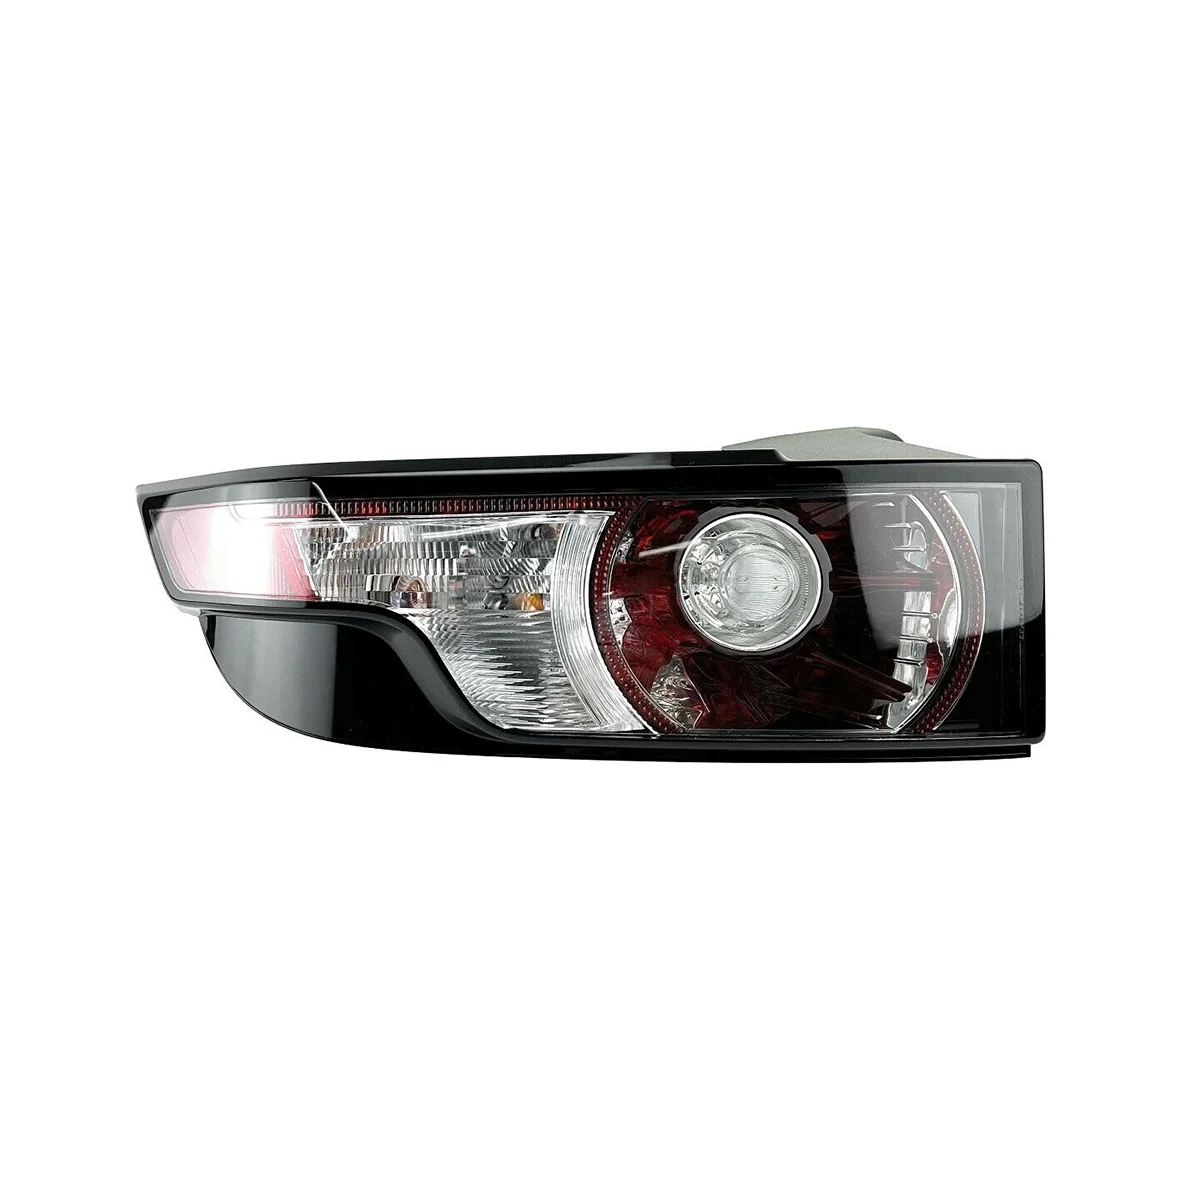 

LR074813 Left Taillight Light LED Tail Lamp Assembly Rear Turn Signal Lamp for Land Rover Range Rover Evoque 2012-2015